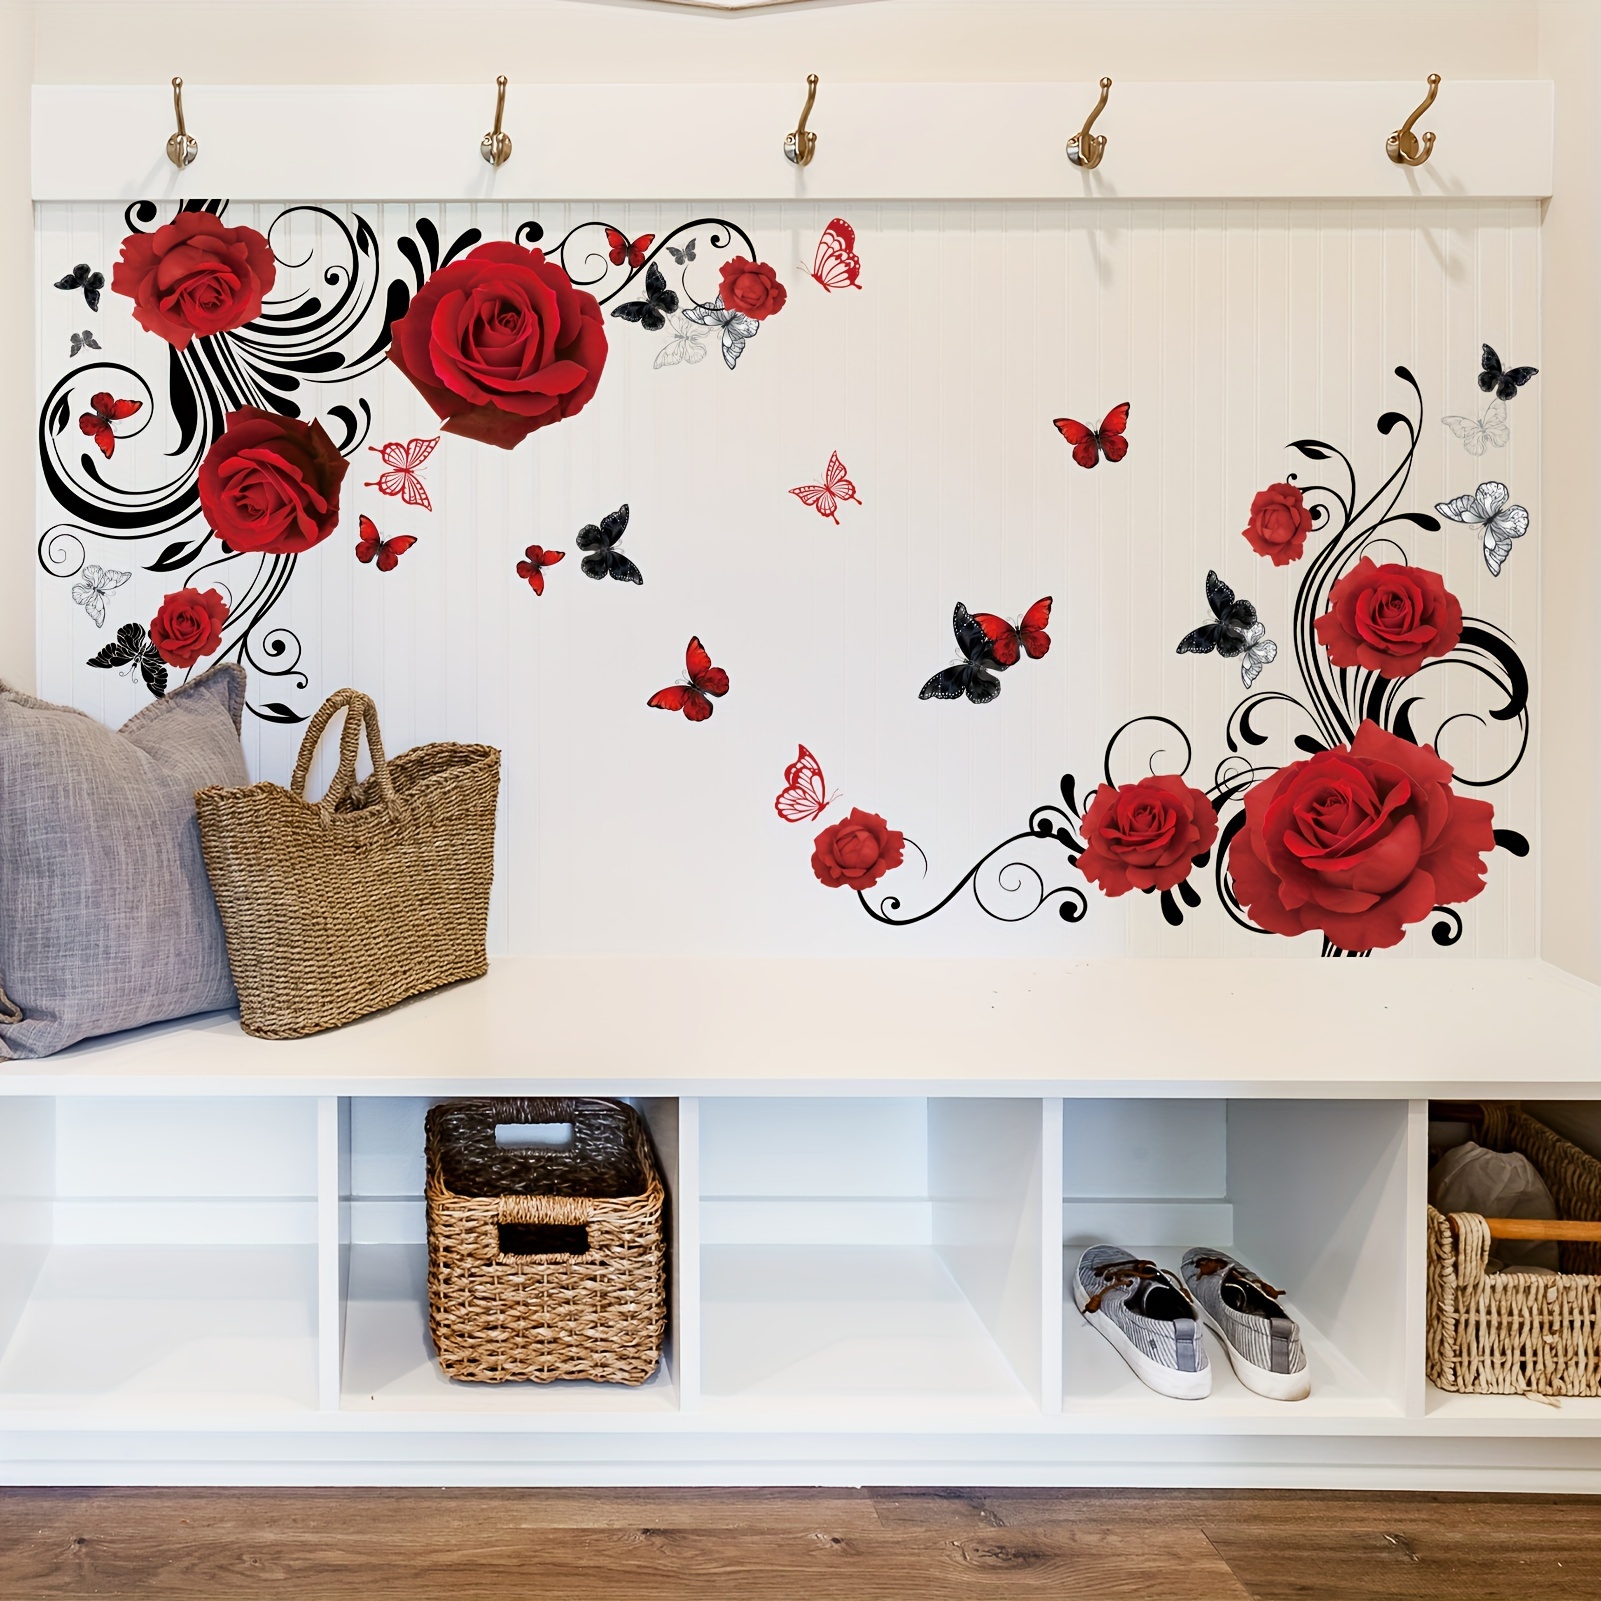 

1pc Removable Sticker, Modern Art, Rose Flower Wall Stickers, Removable Self-adhesive Waterproof, For Bedroom Living Room Decor, Home Decor, Room Decor, Sticker Packs